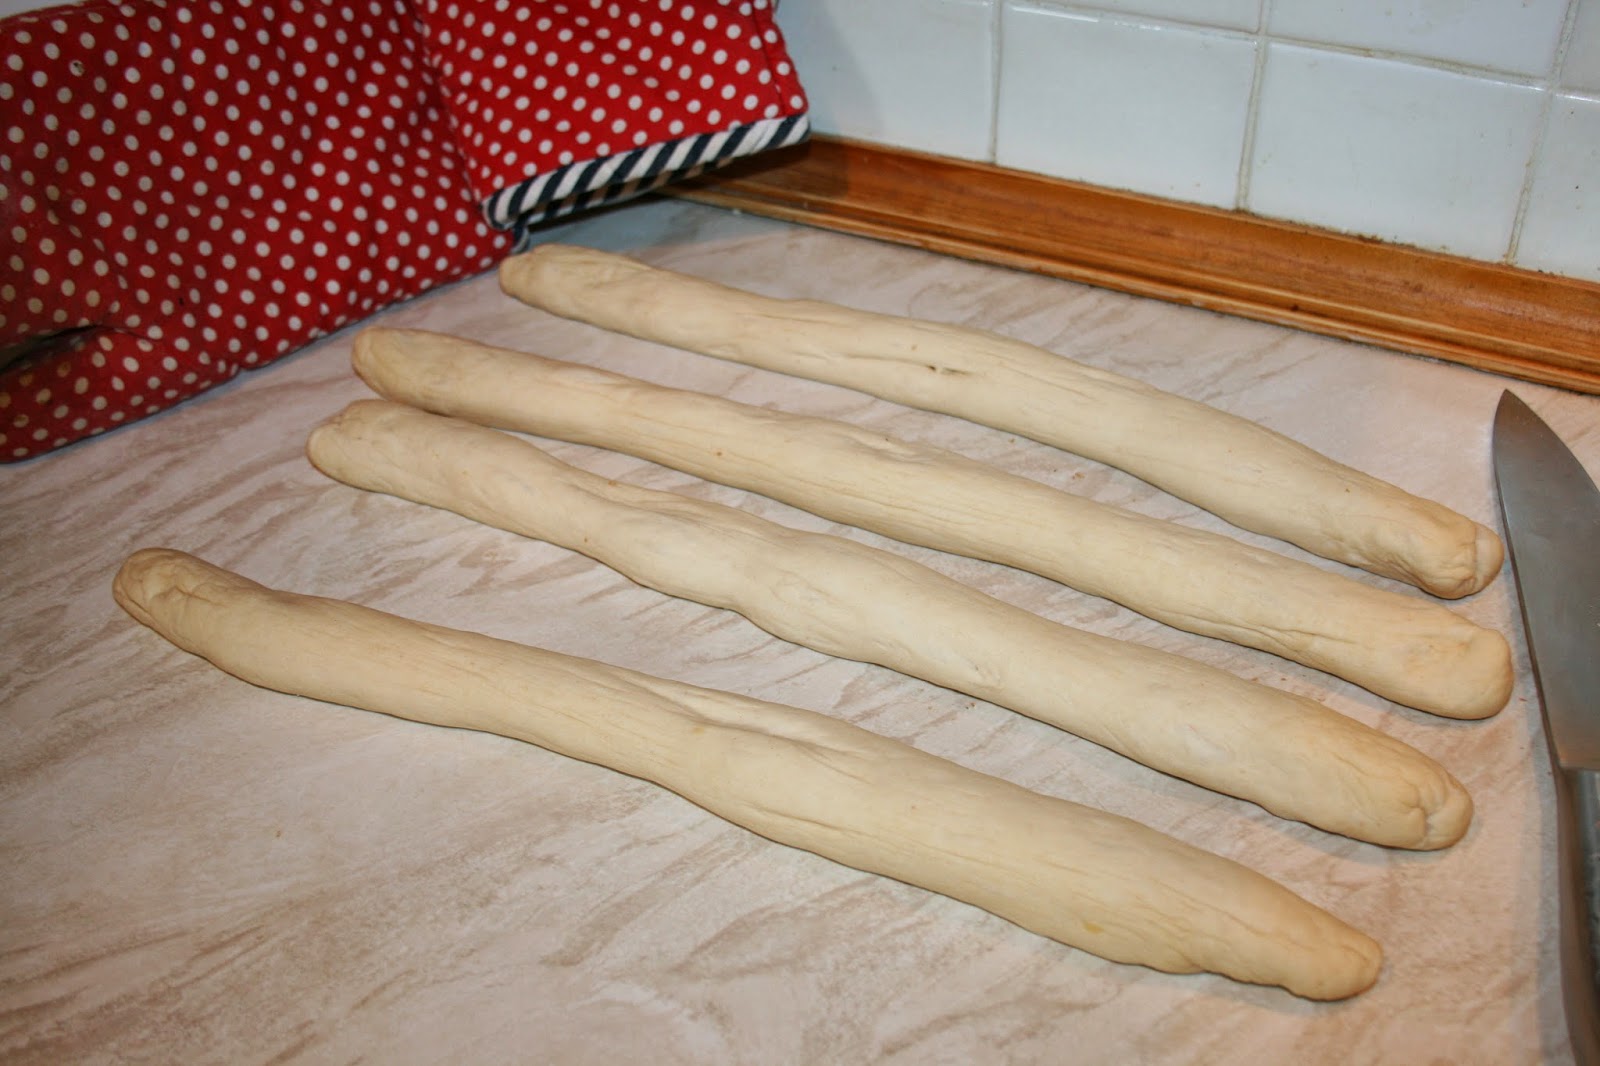 How To Braid Bread - A Four-Stranded Plait | Homemade ...